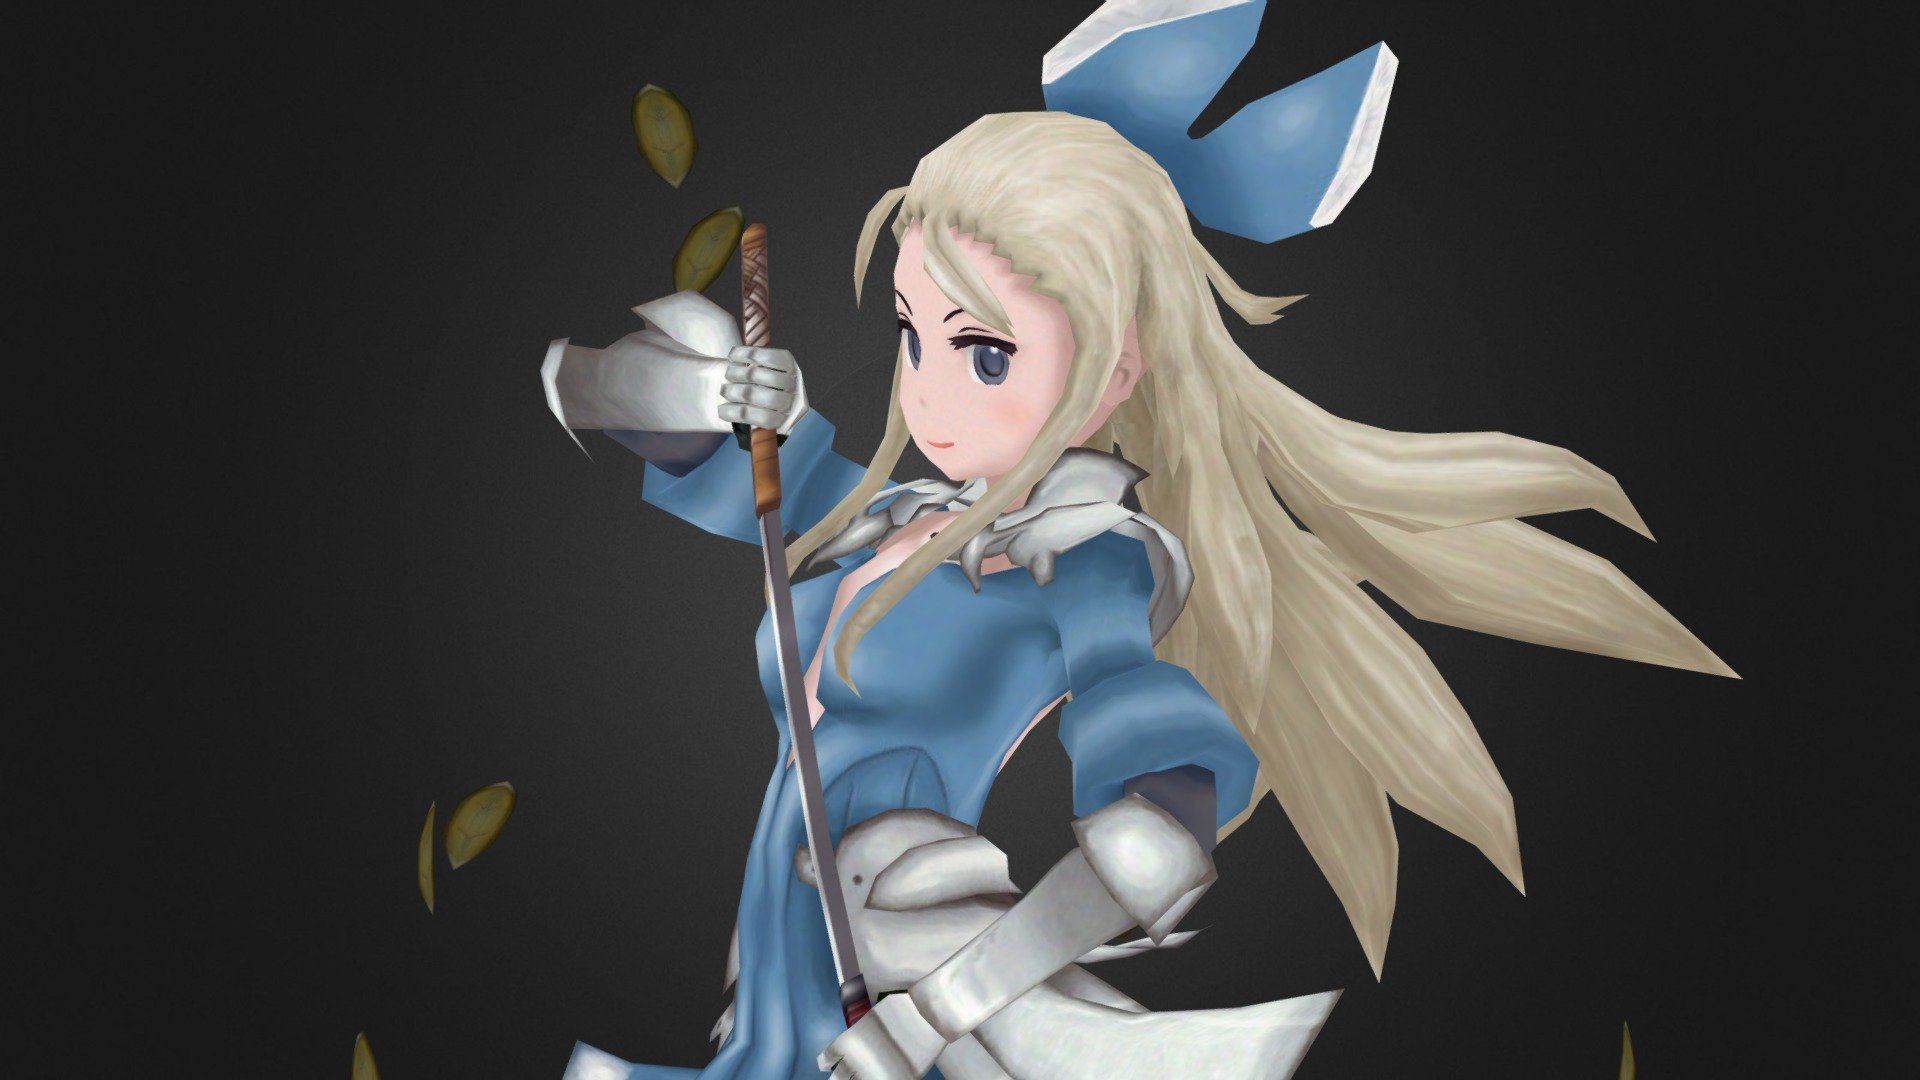 Bravely Second: End Layer - Welcome Back Edea Lee (Nintendo 3DS